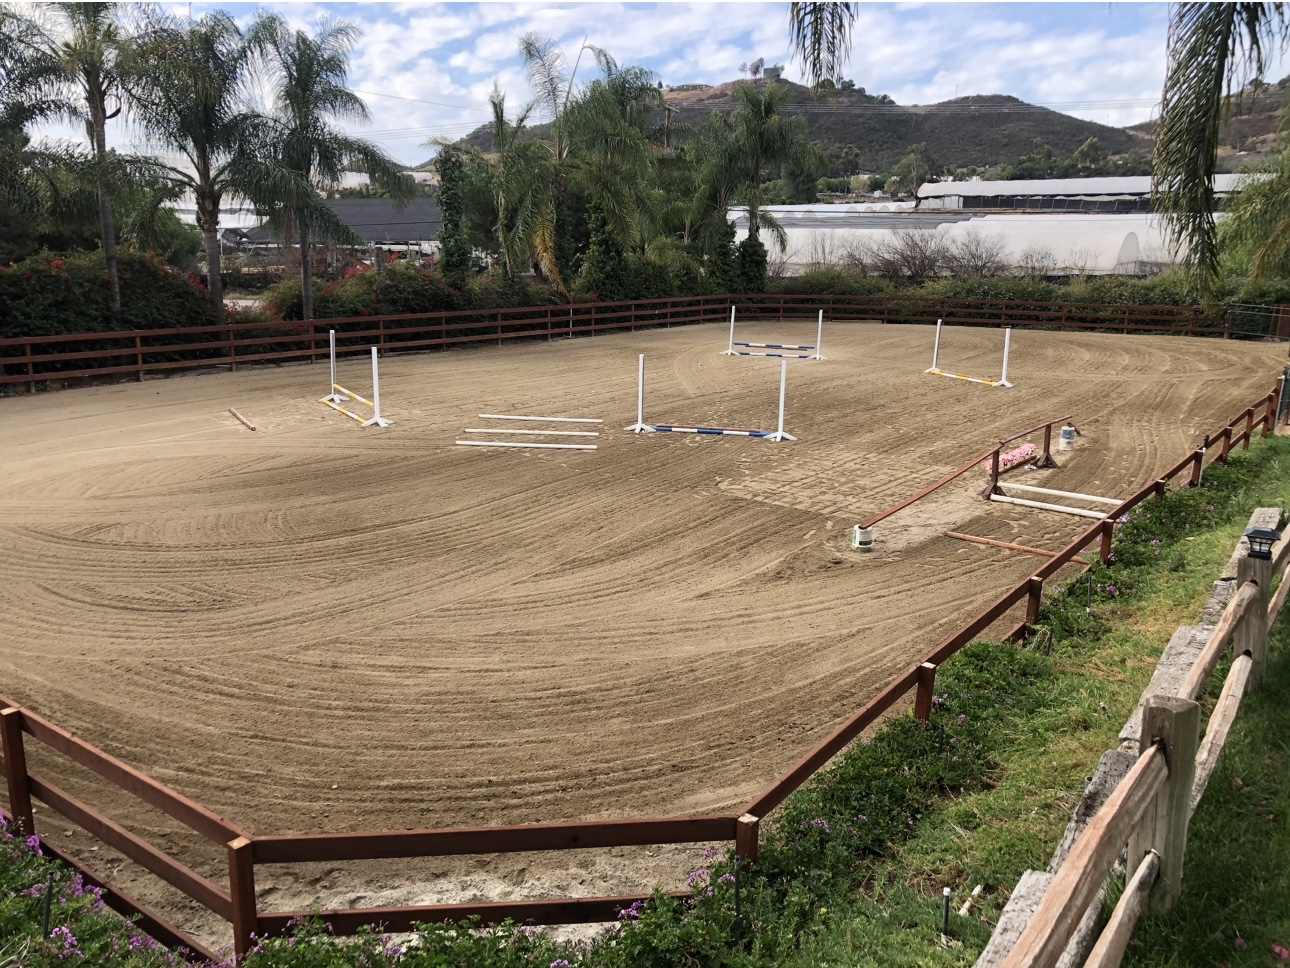 Course in a small arena.